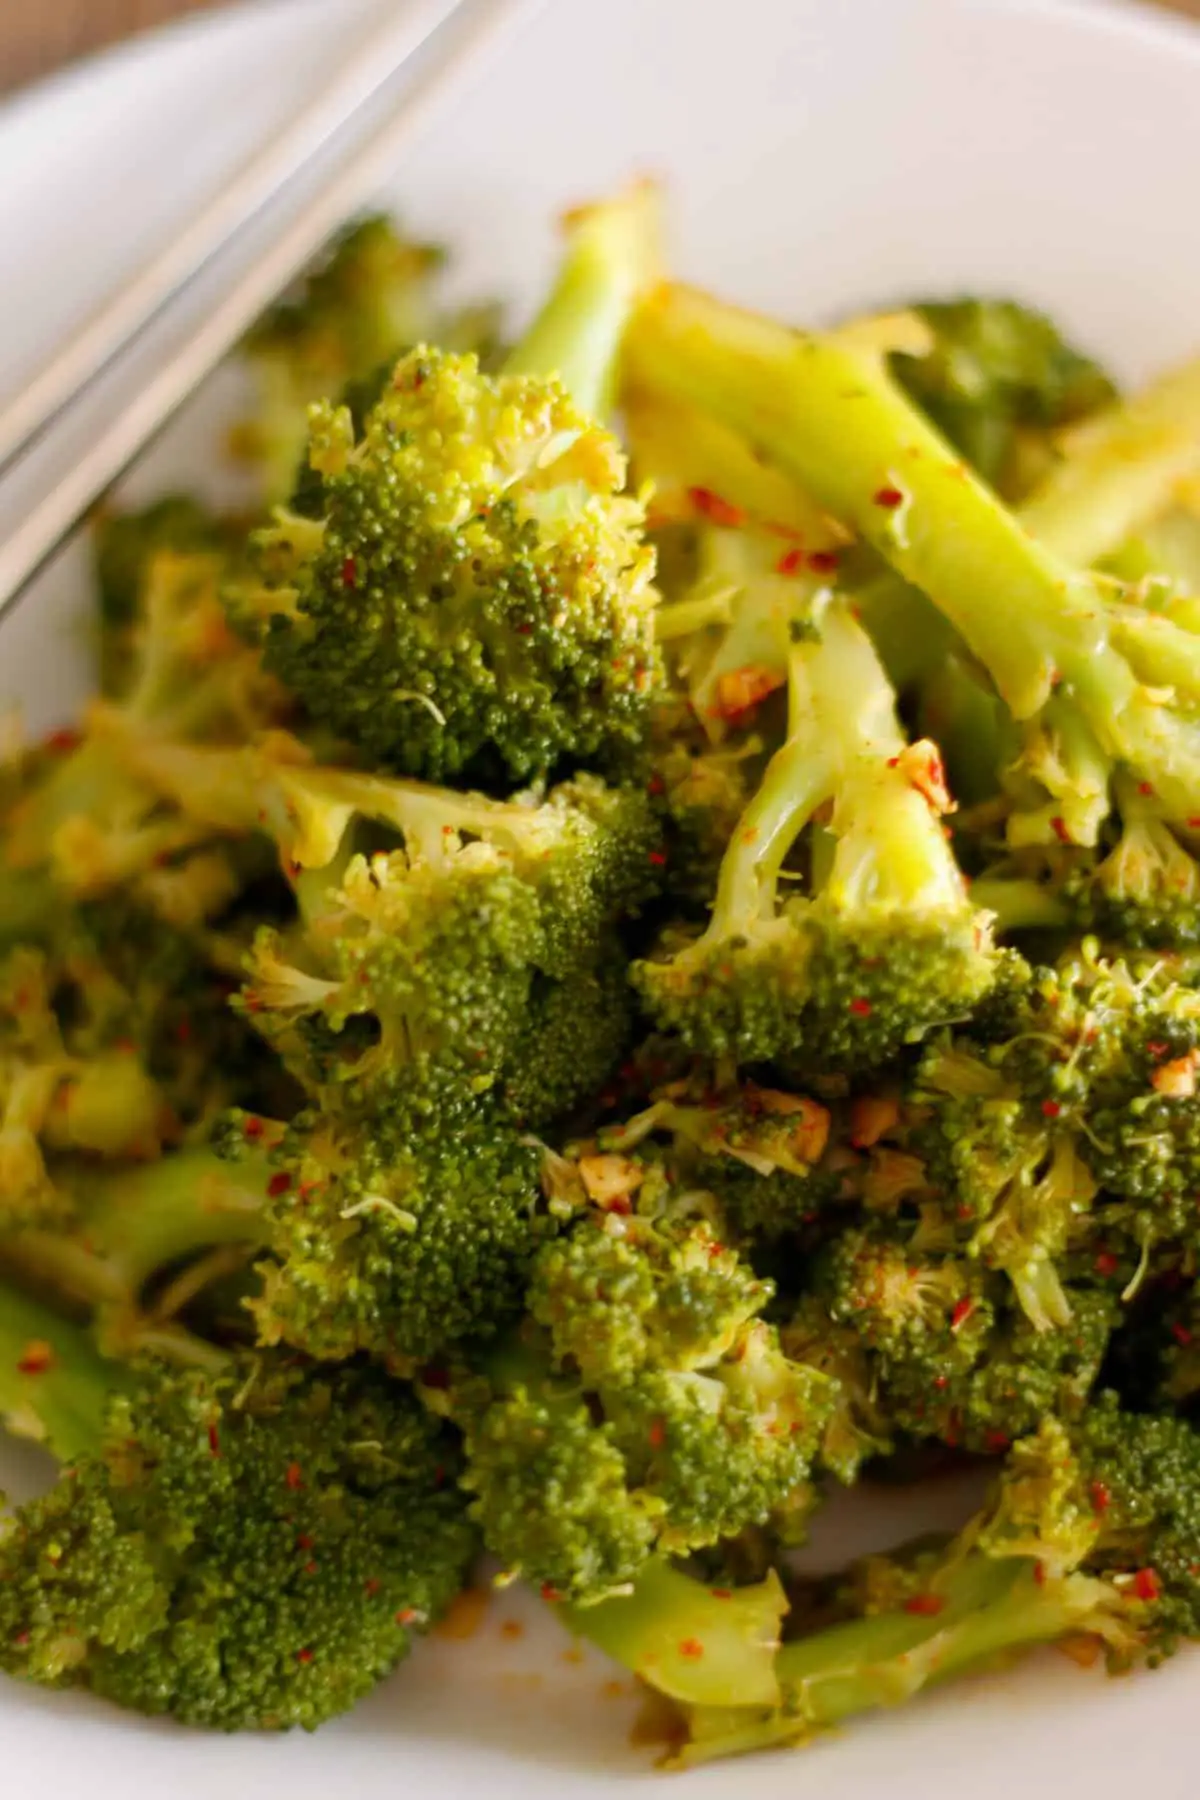 Broccoli florets seasoned in a Korean style sauce and flecked with red pepper flakes in a white bowl. There is a pair of silver chopsticks resting on the bowl in the background.